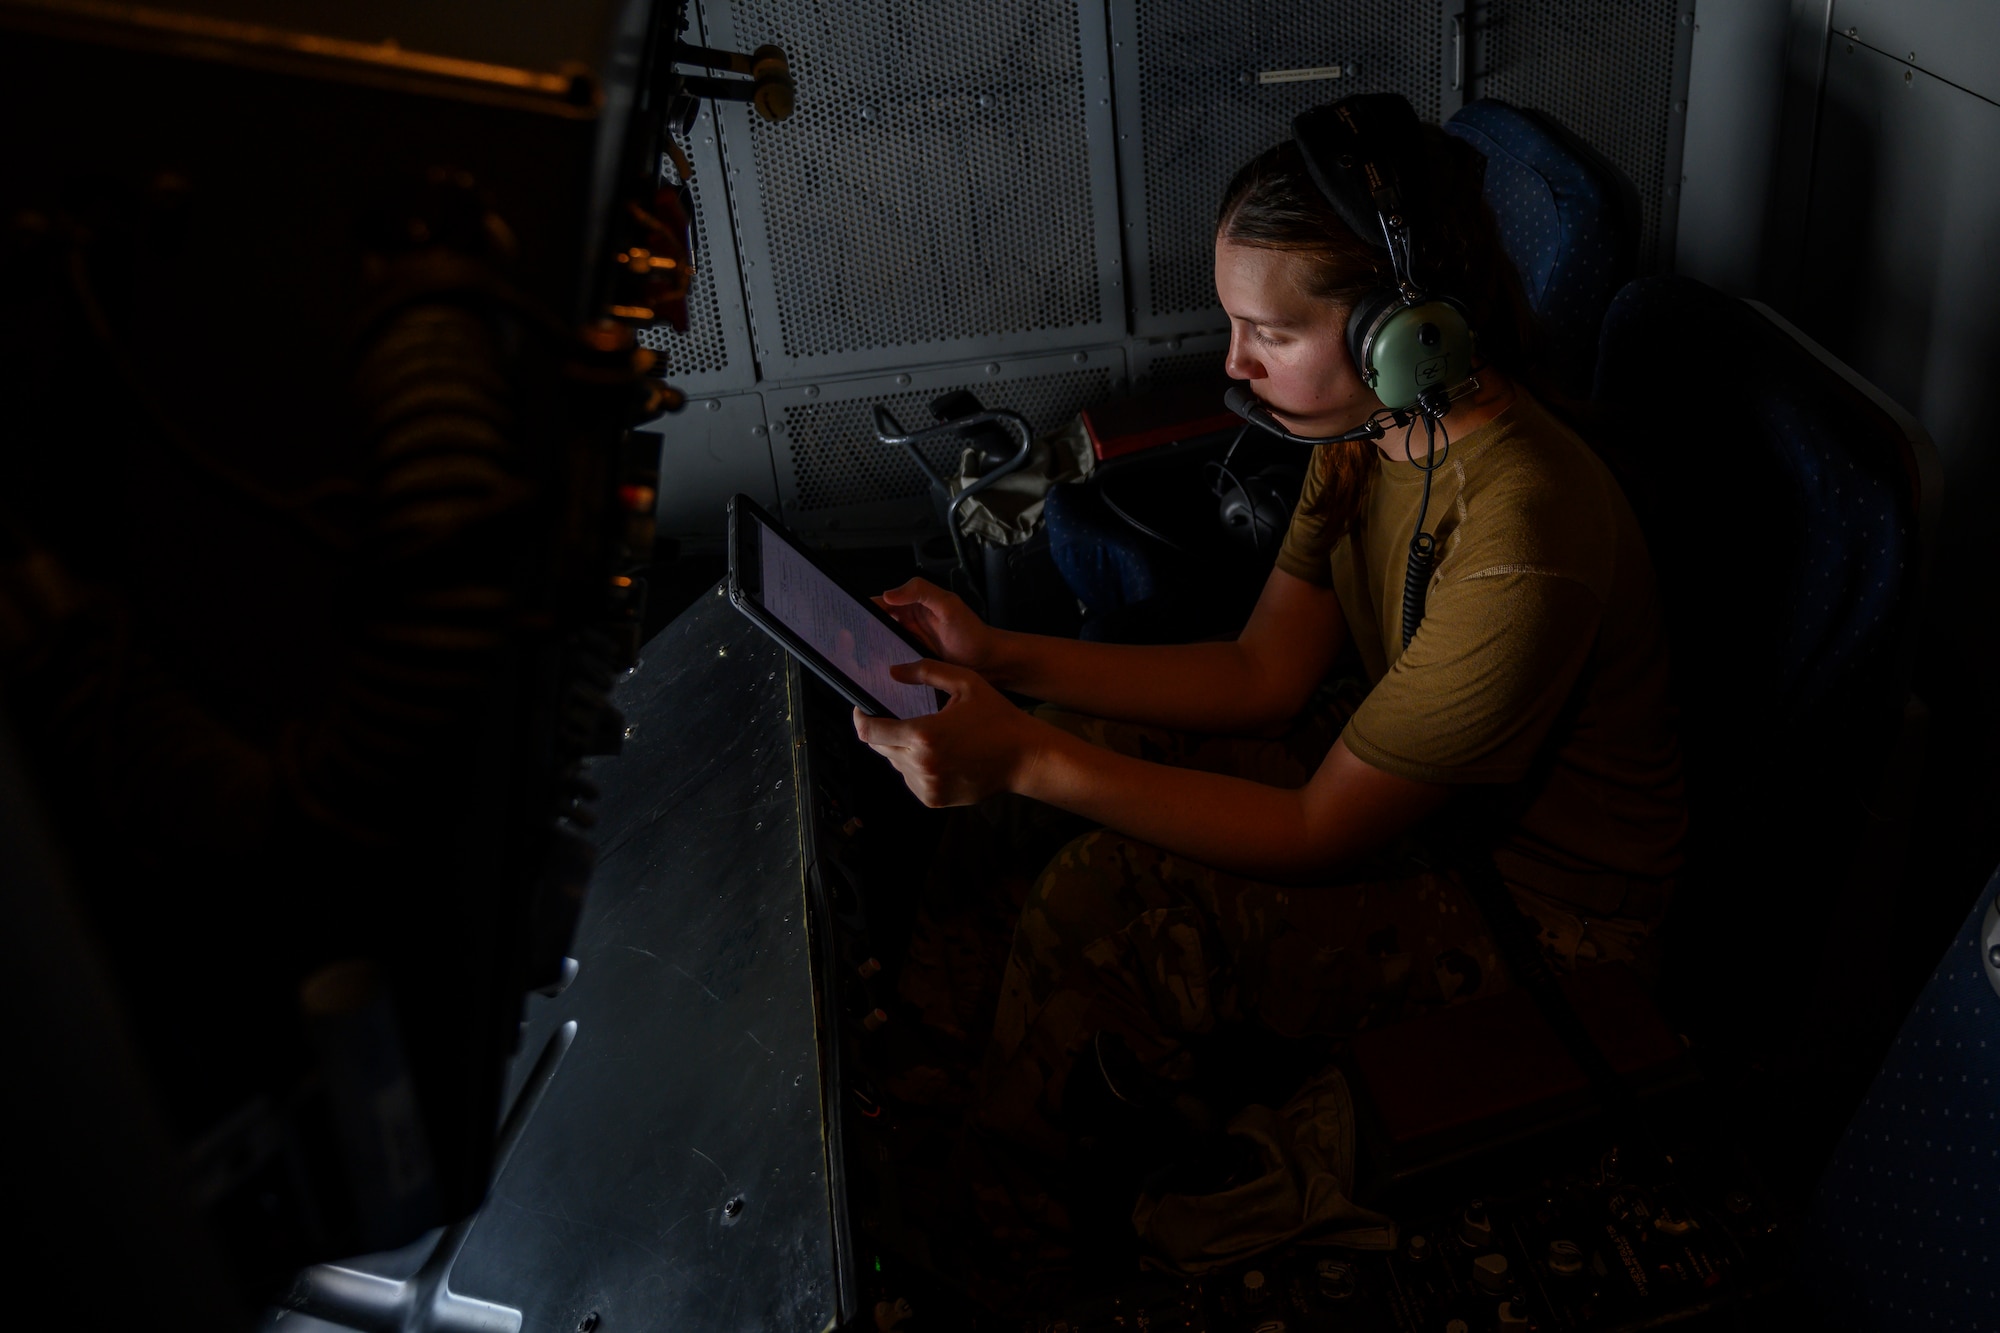 Female airman sitting in aircraft refueling bay